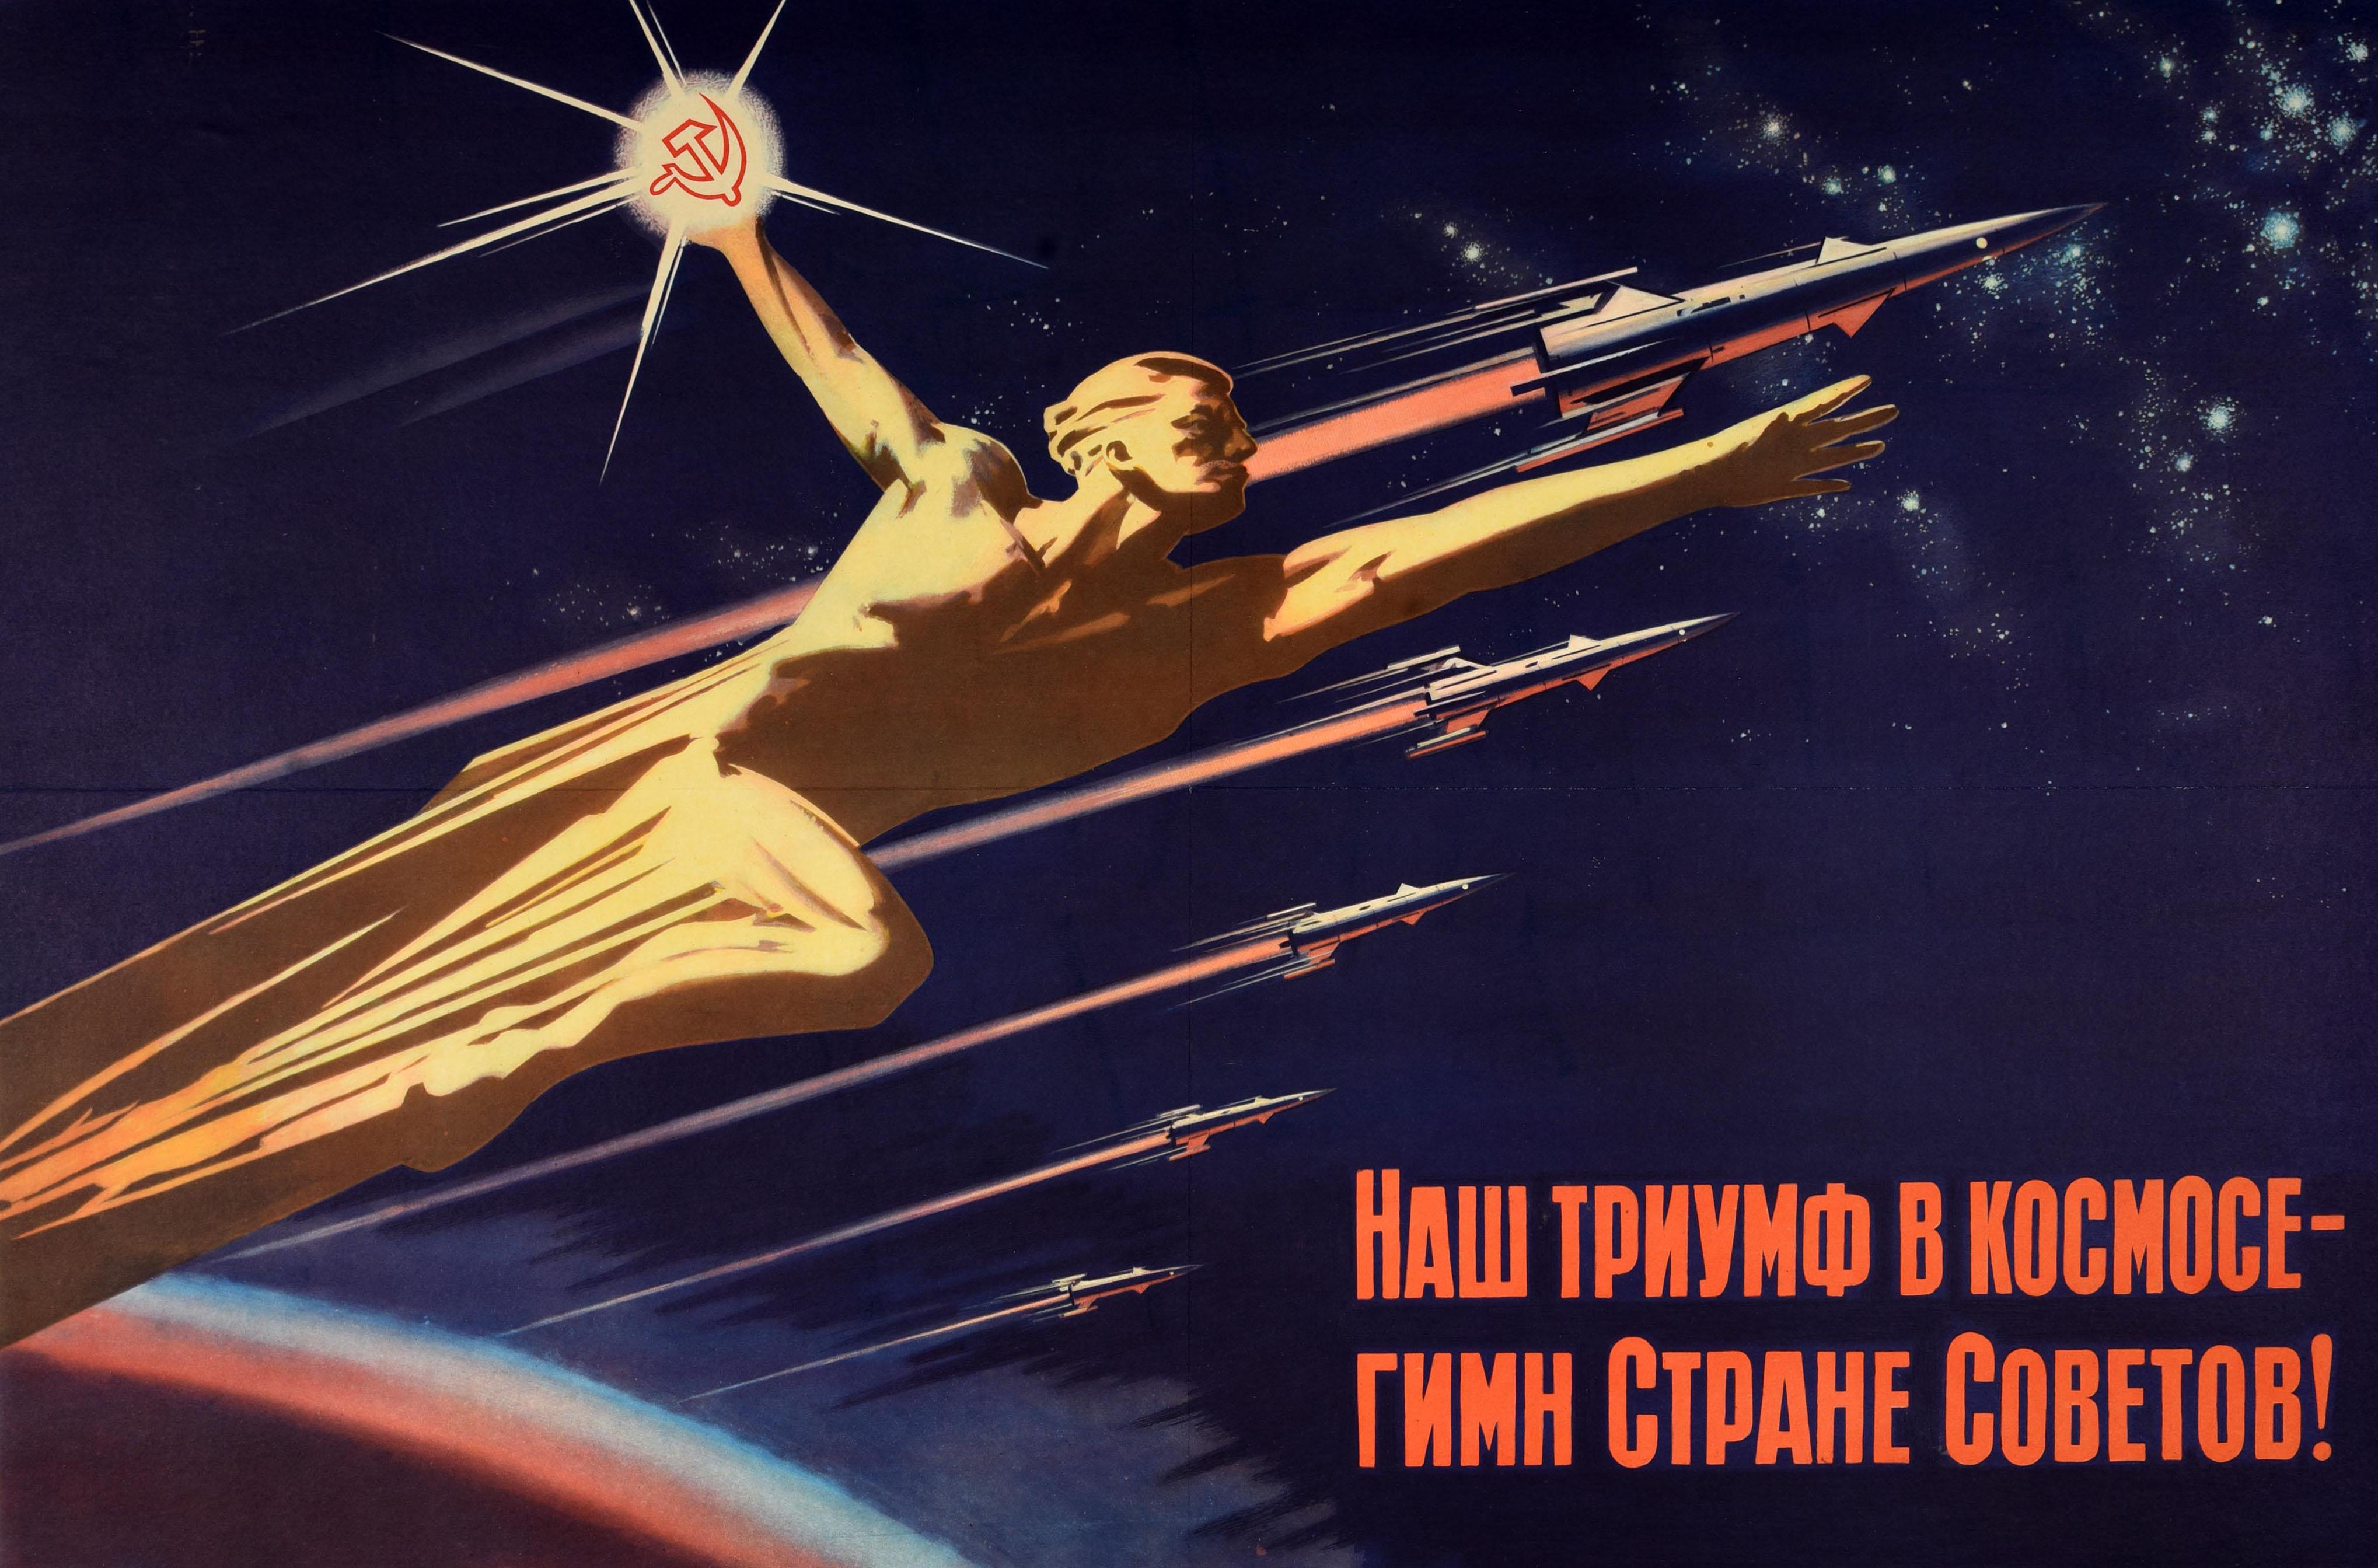 Original vintage USSR space race propaganda poster - Наш Триумф В Космосе Гимн Стране Советов! Our Triumph in Space Anthem to the Land of the Soviets - featuring a dynamic design depicting a man holding a hammer and sickle symbol in one hand with